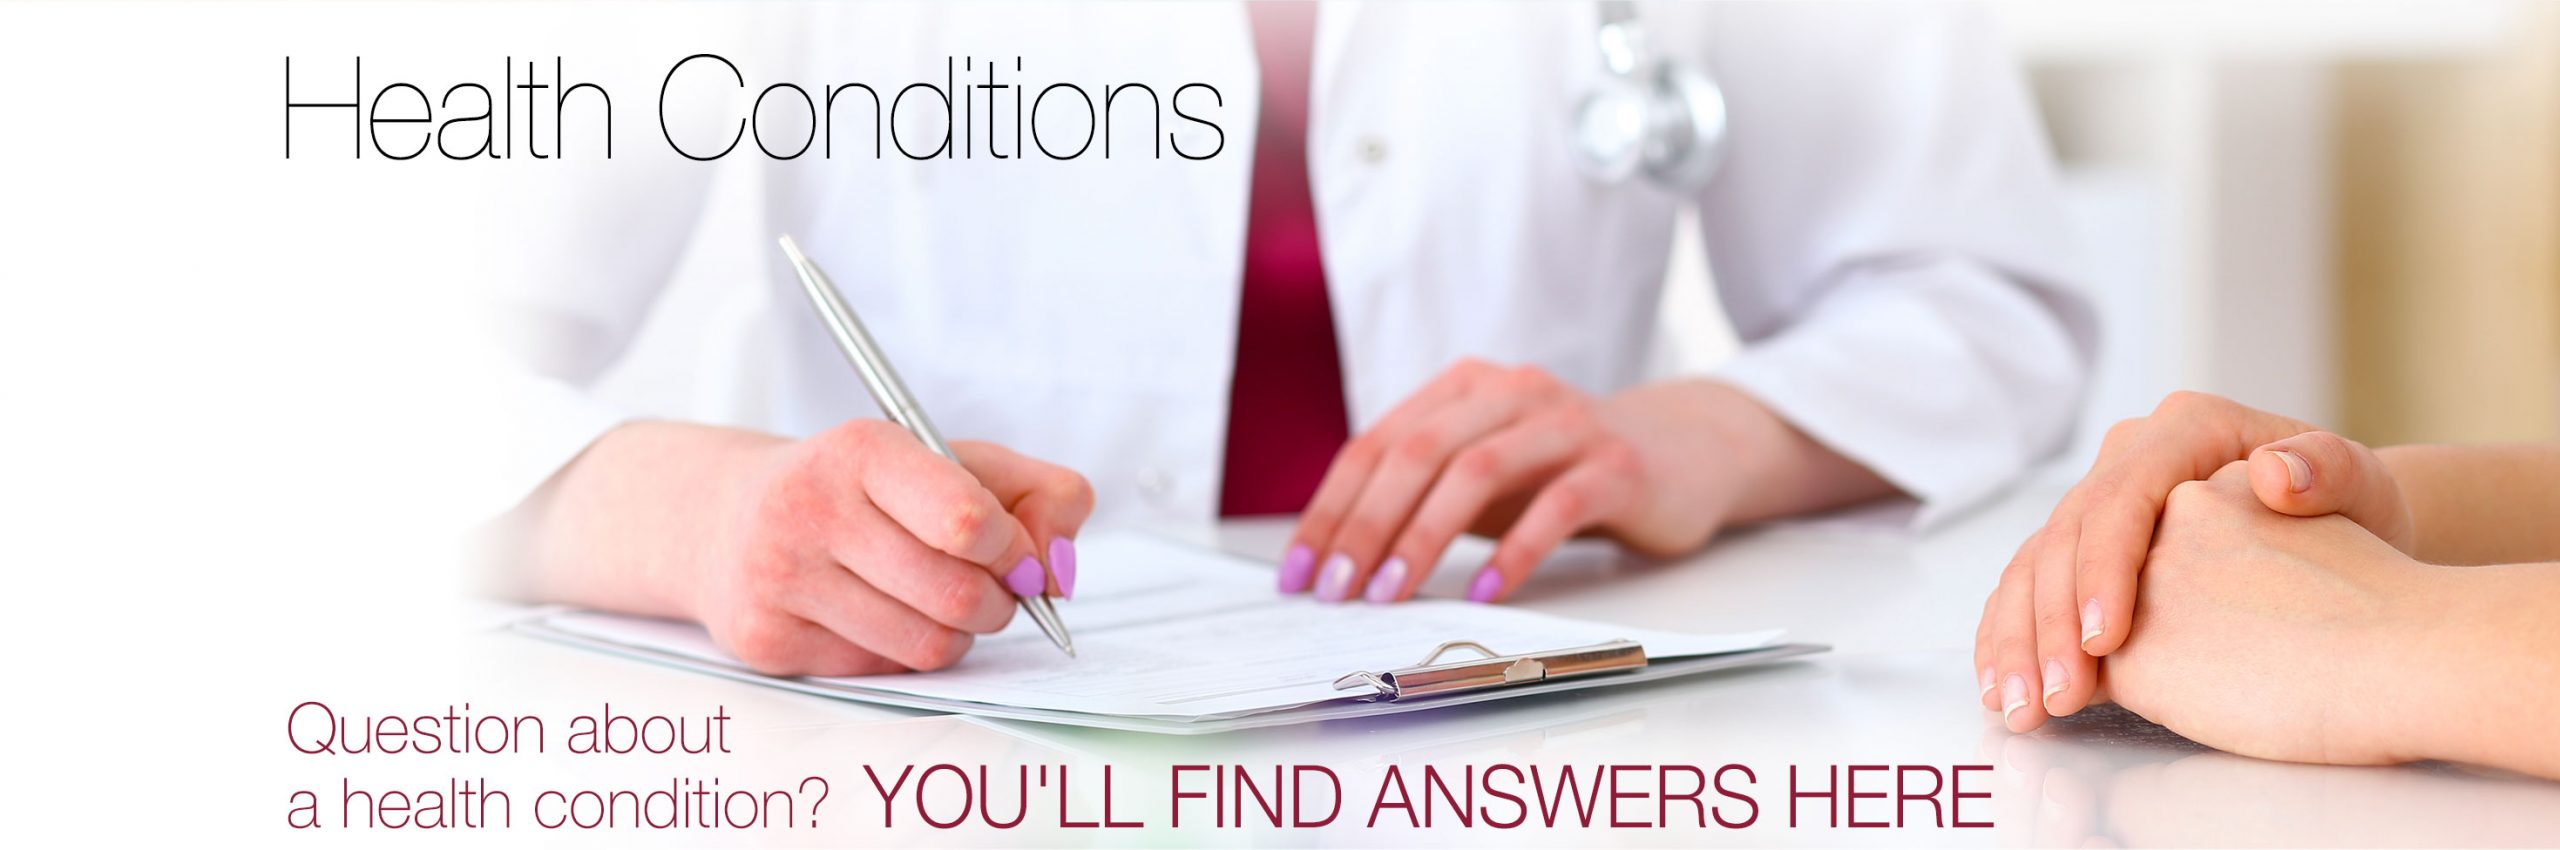 Health Conditions—Find Your Answers Here